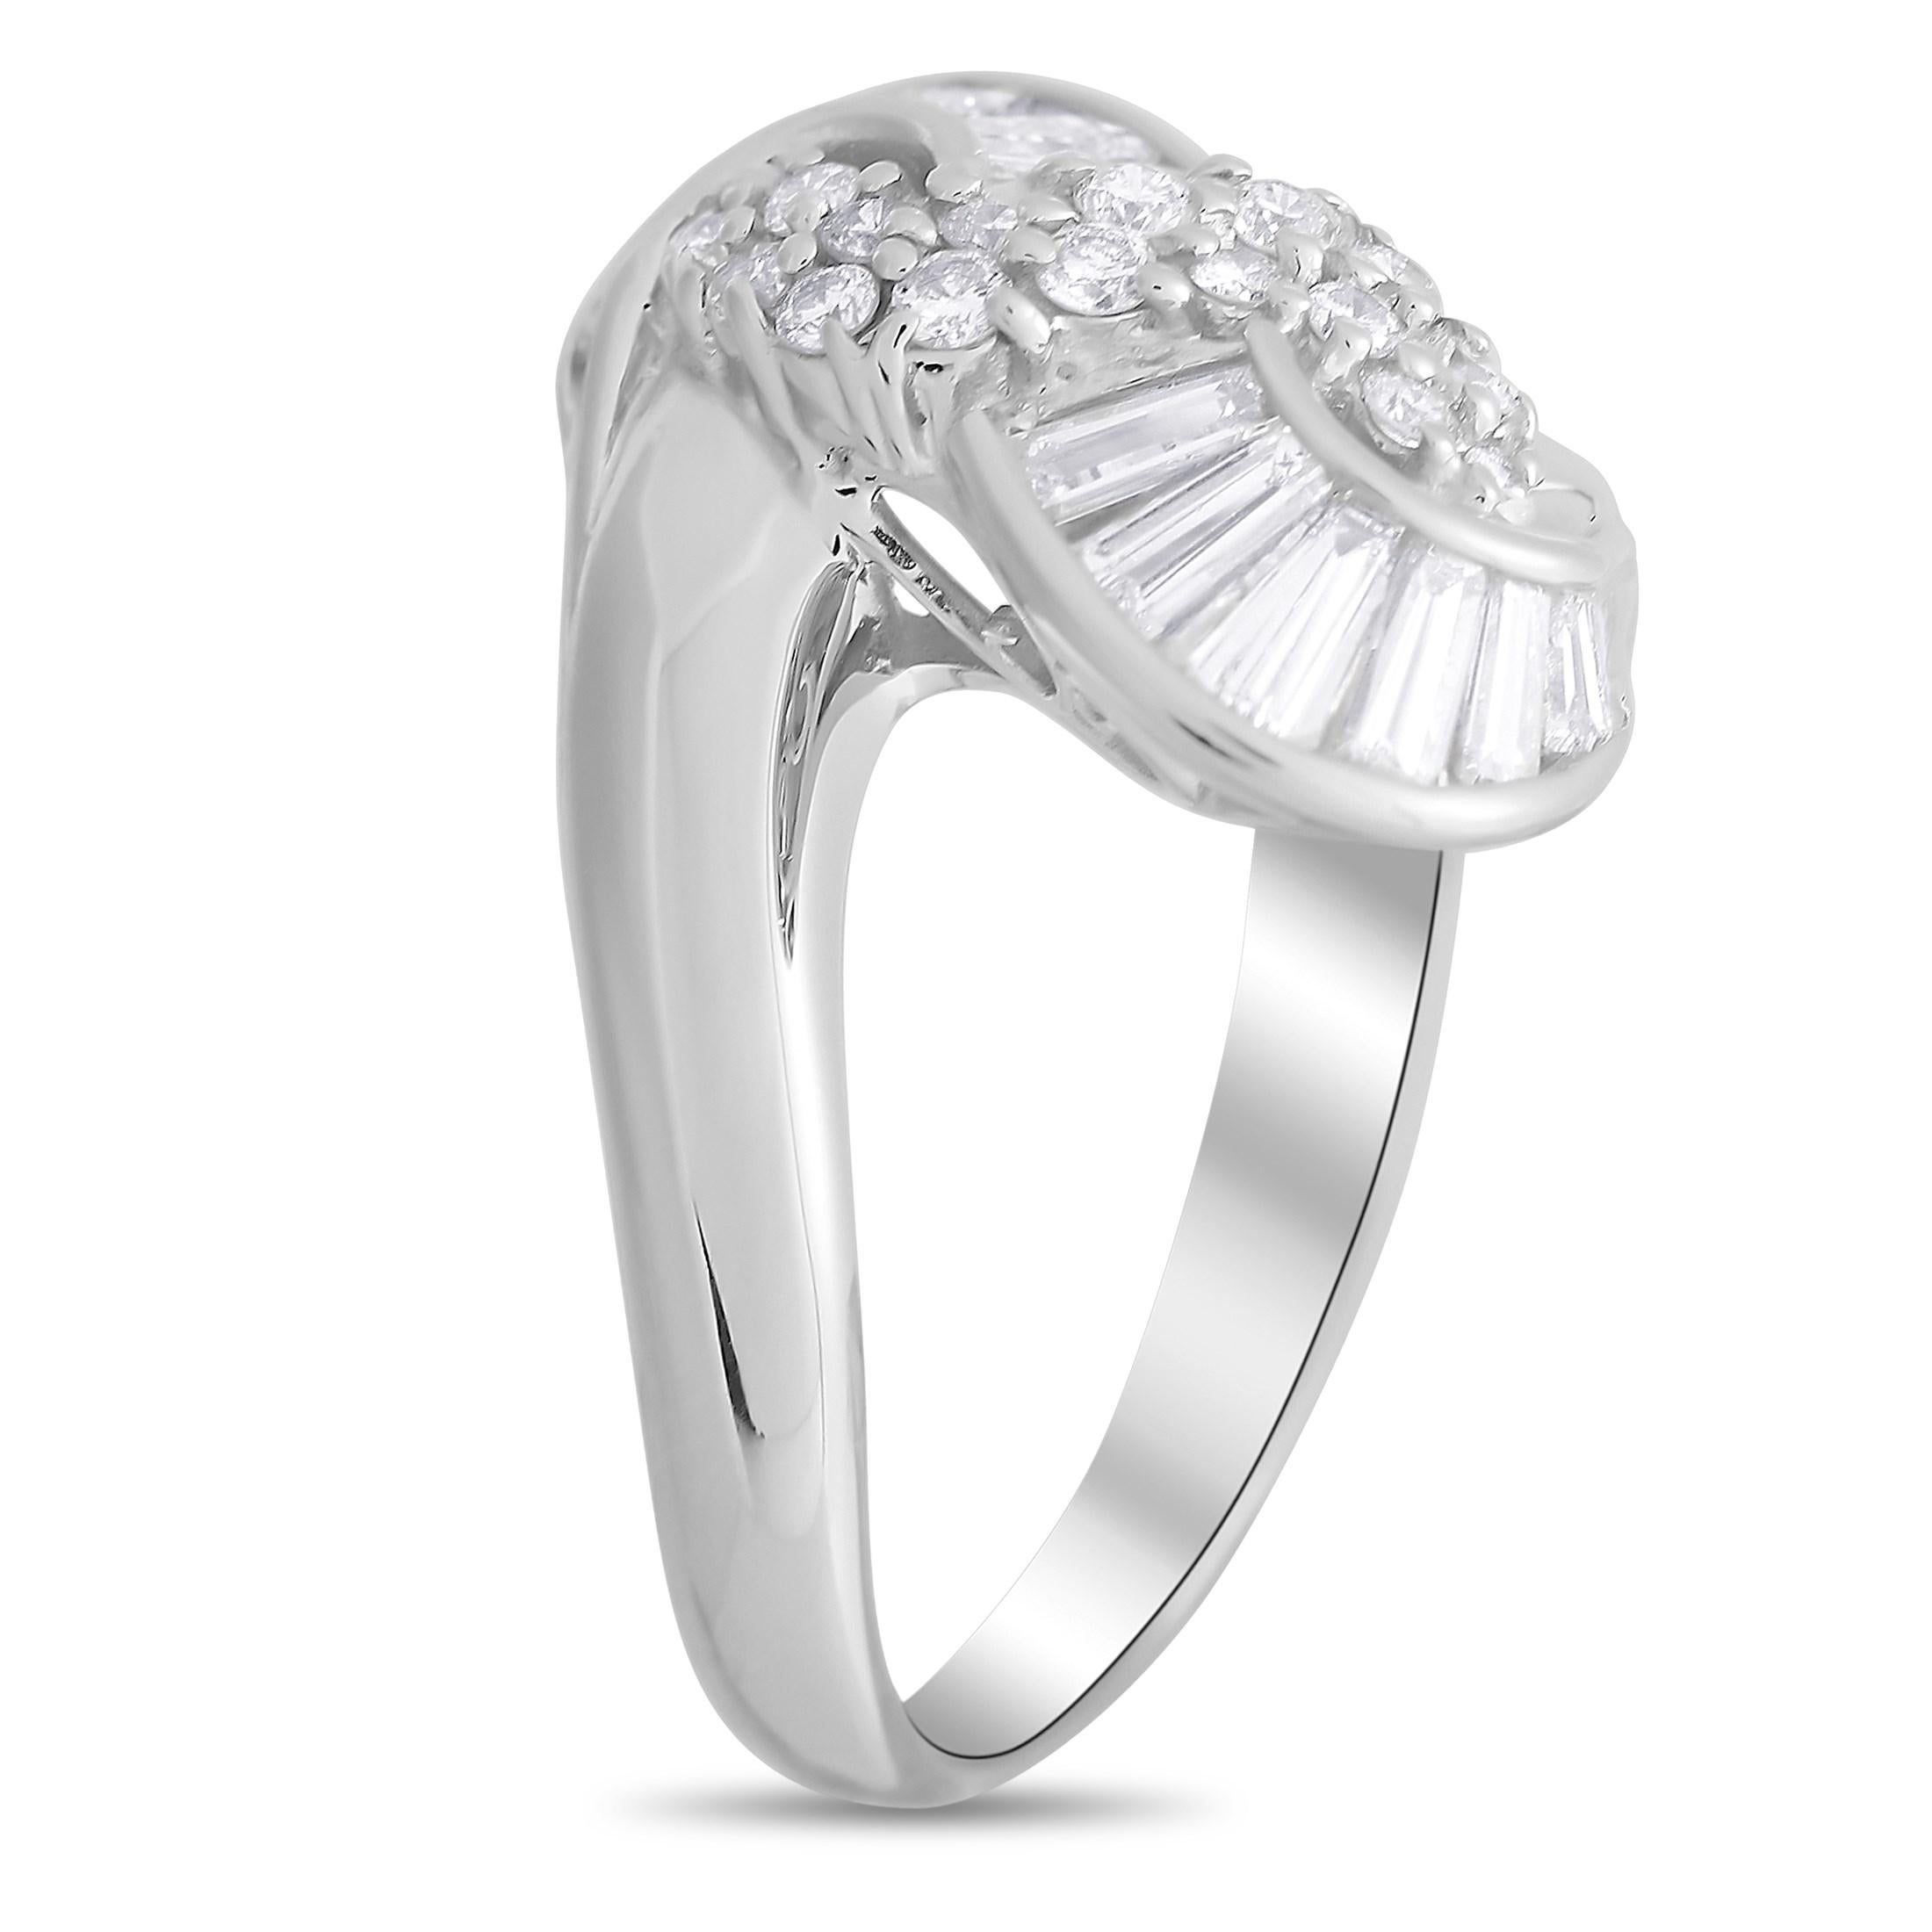 This luxury ring’s Platinum setting possesses a stunning sense of movement. Its gracefully curved lines are only enhanced by the presence of sparkling diamonds, which together total 0.81 carats. It features a 3mm wide band and a 6mm top height,